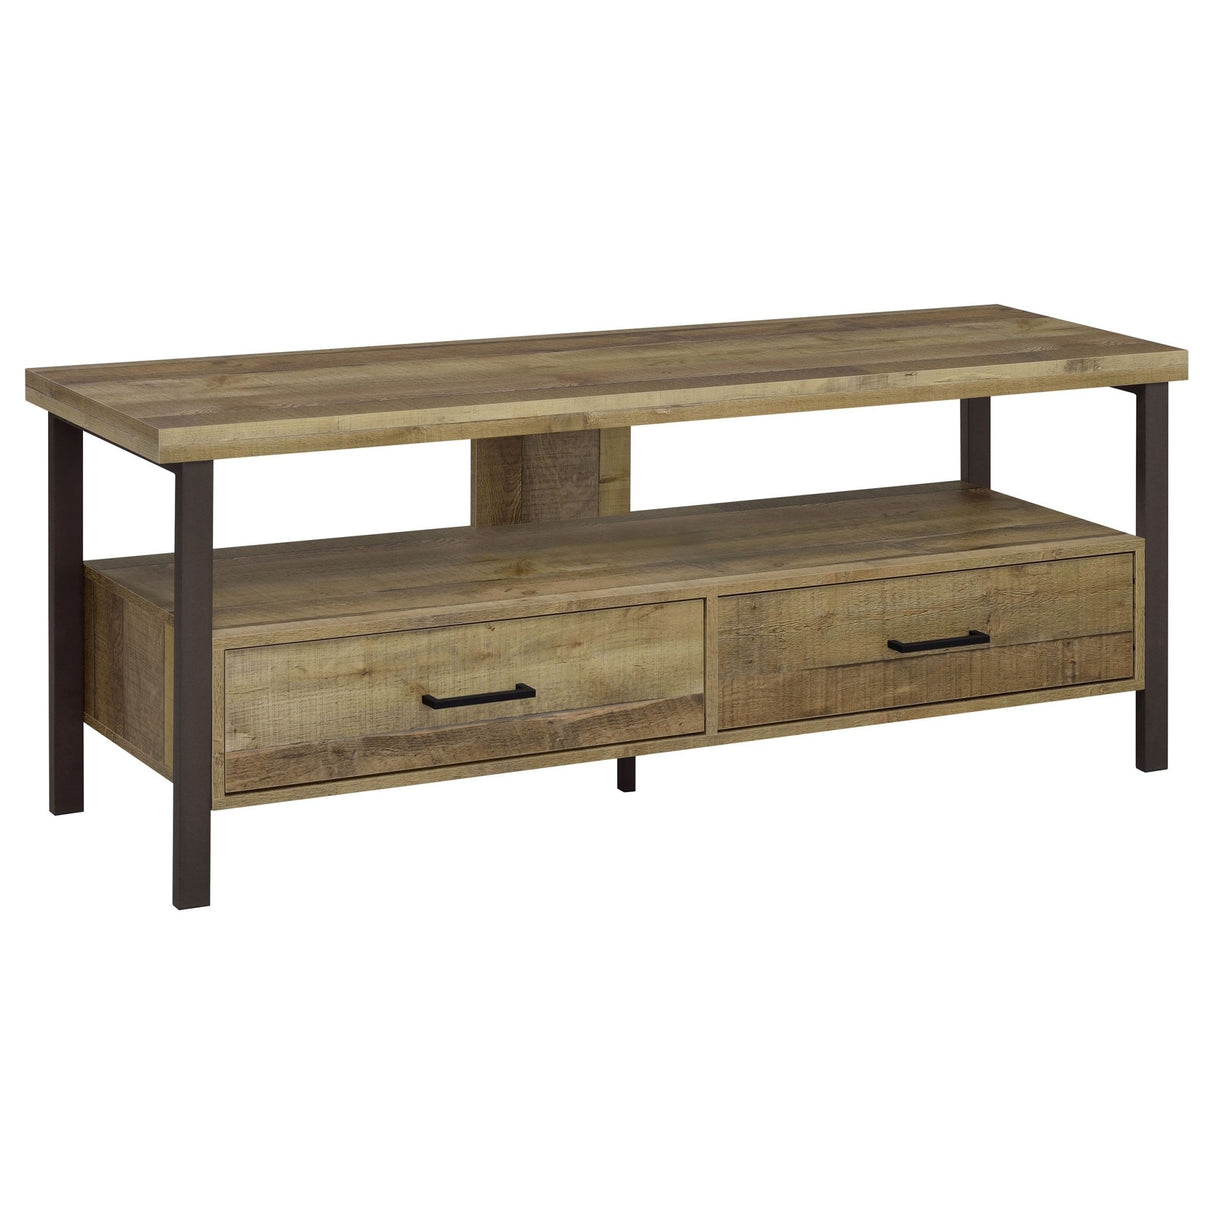 59" Tv Stand - Ruston 59" 2-drawer TV Console Weathered Pine